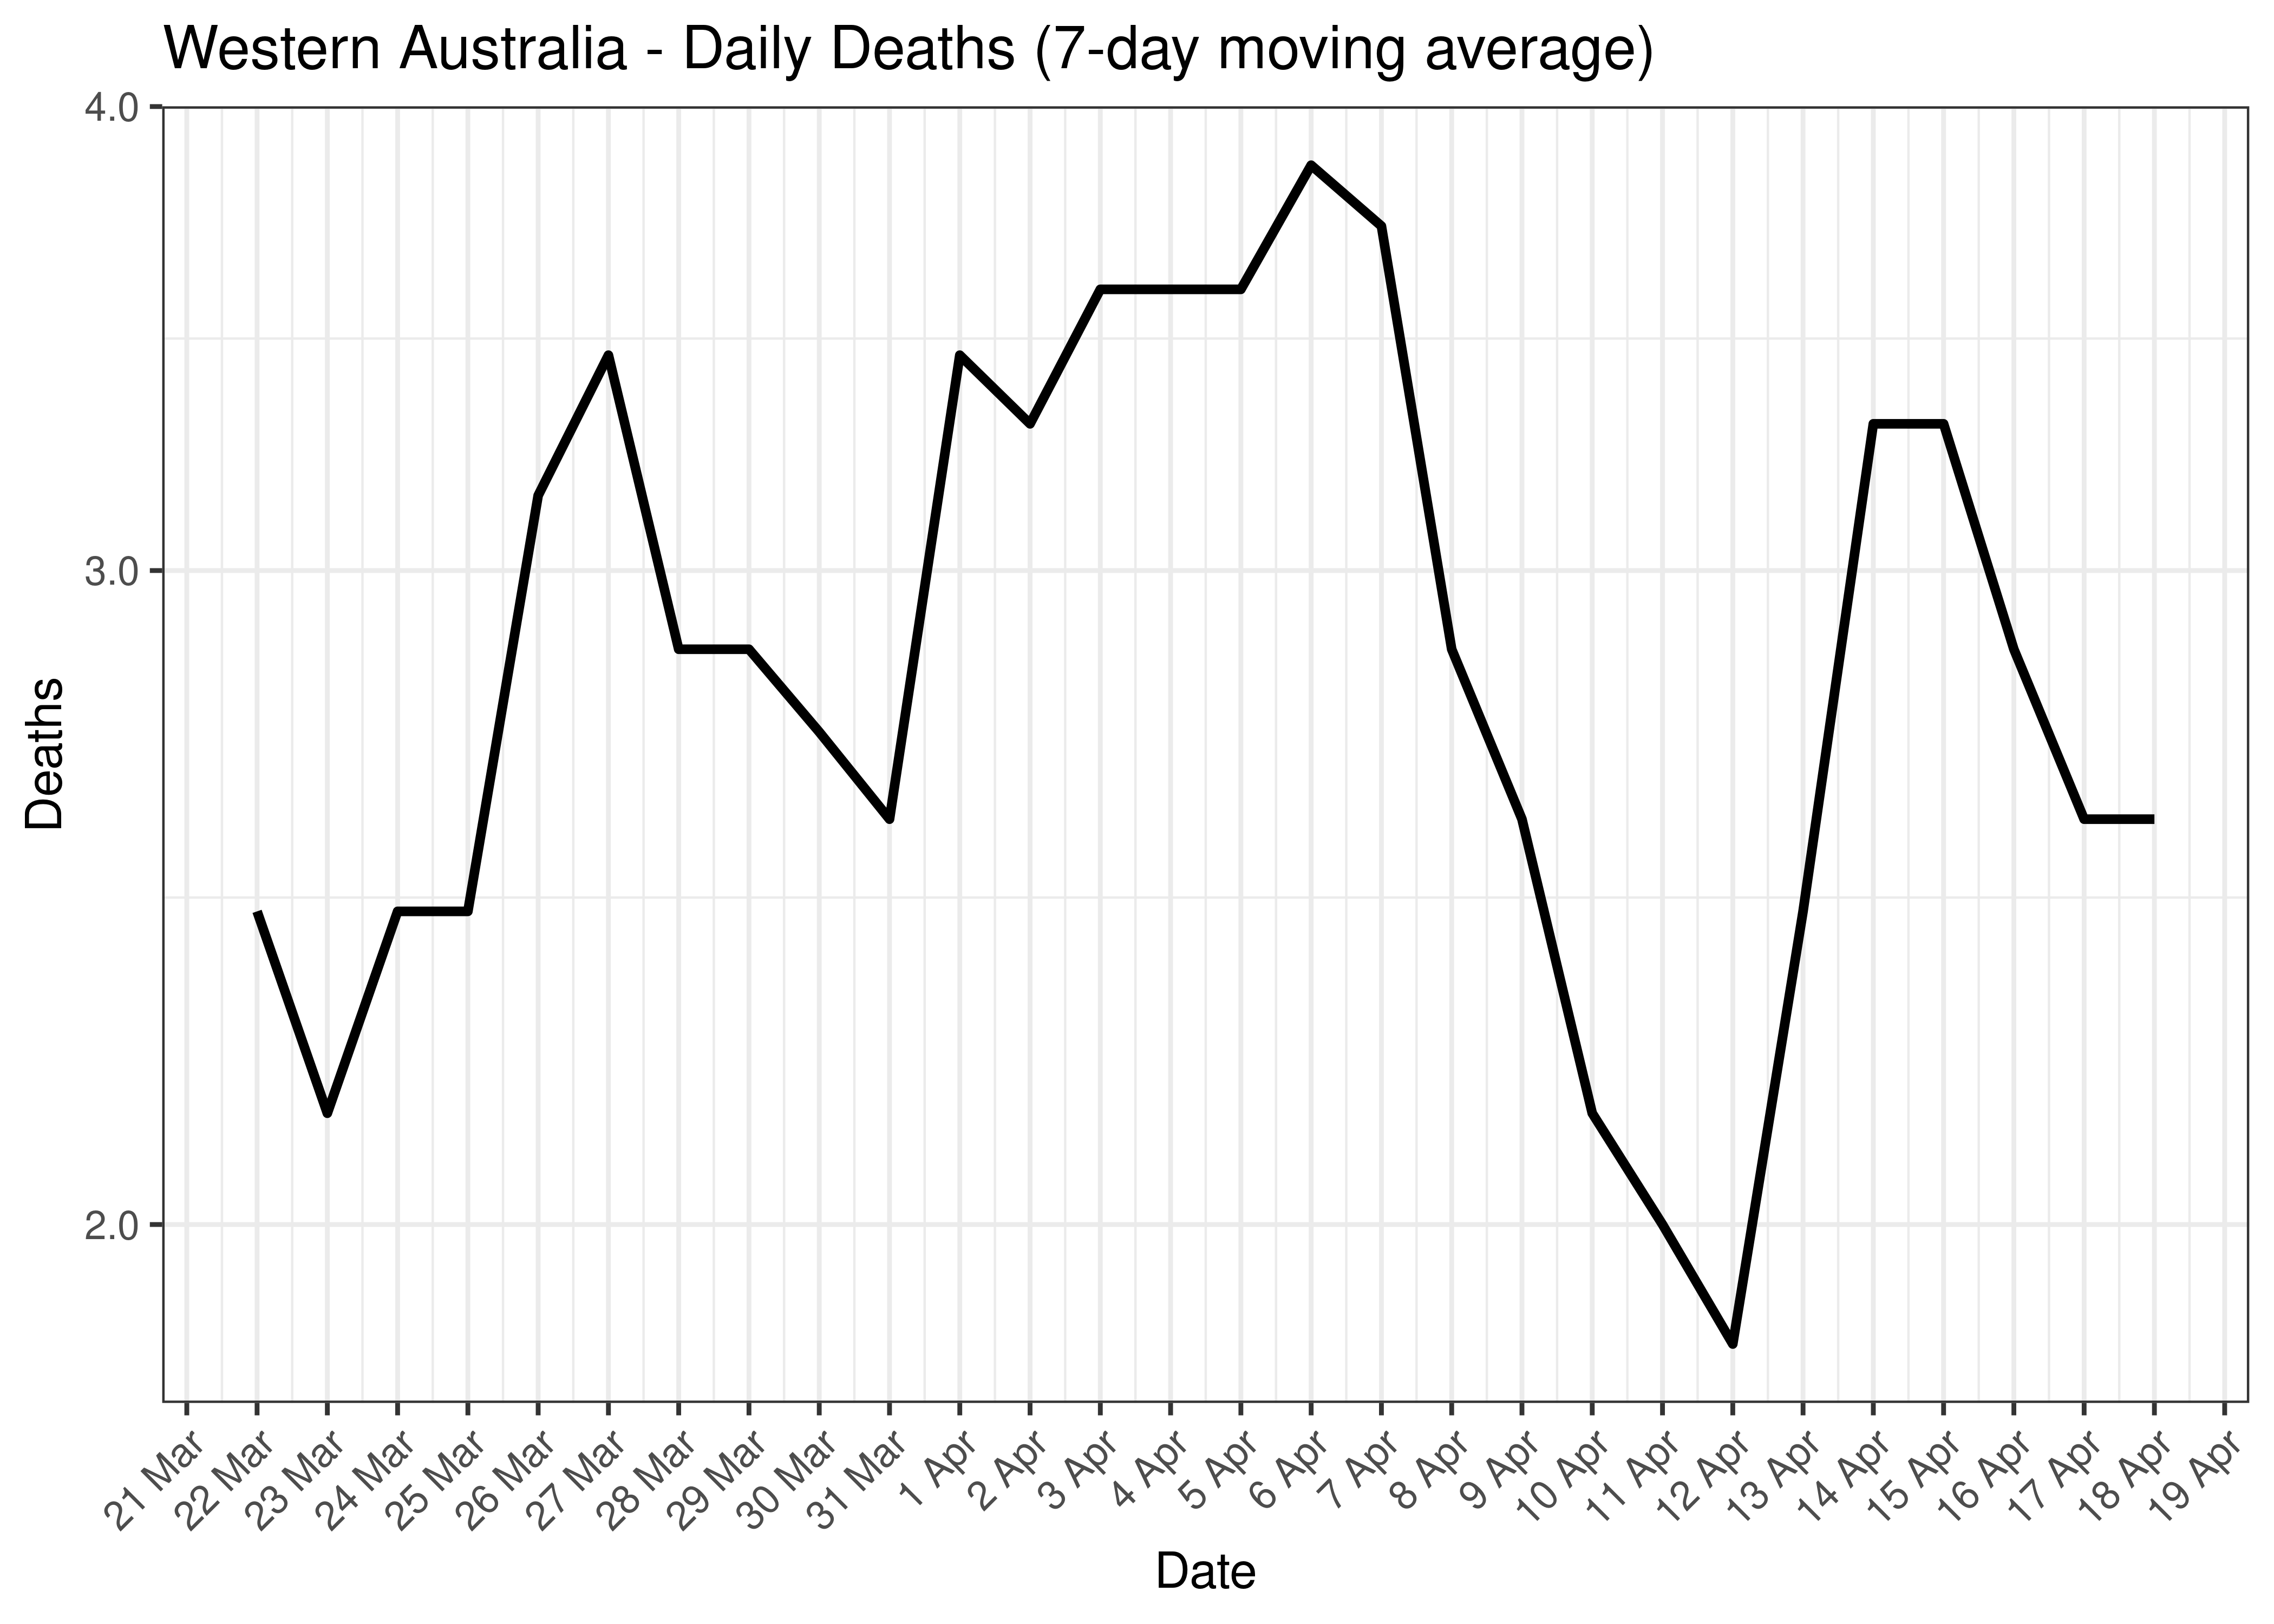 Western Australia - Daily Deaths for Last 30-days (7-day moving average)